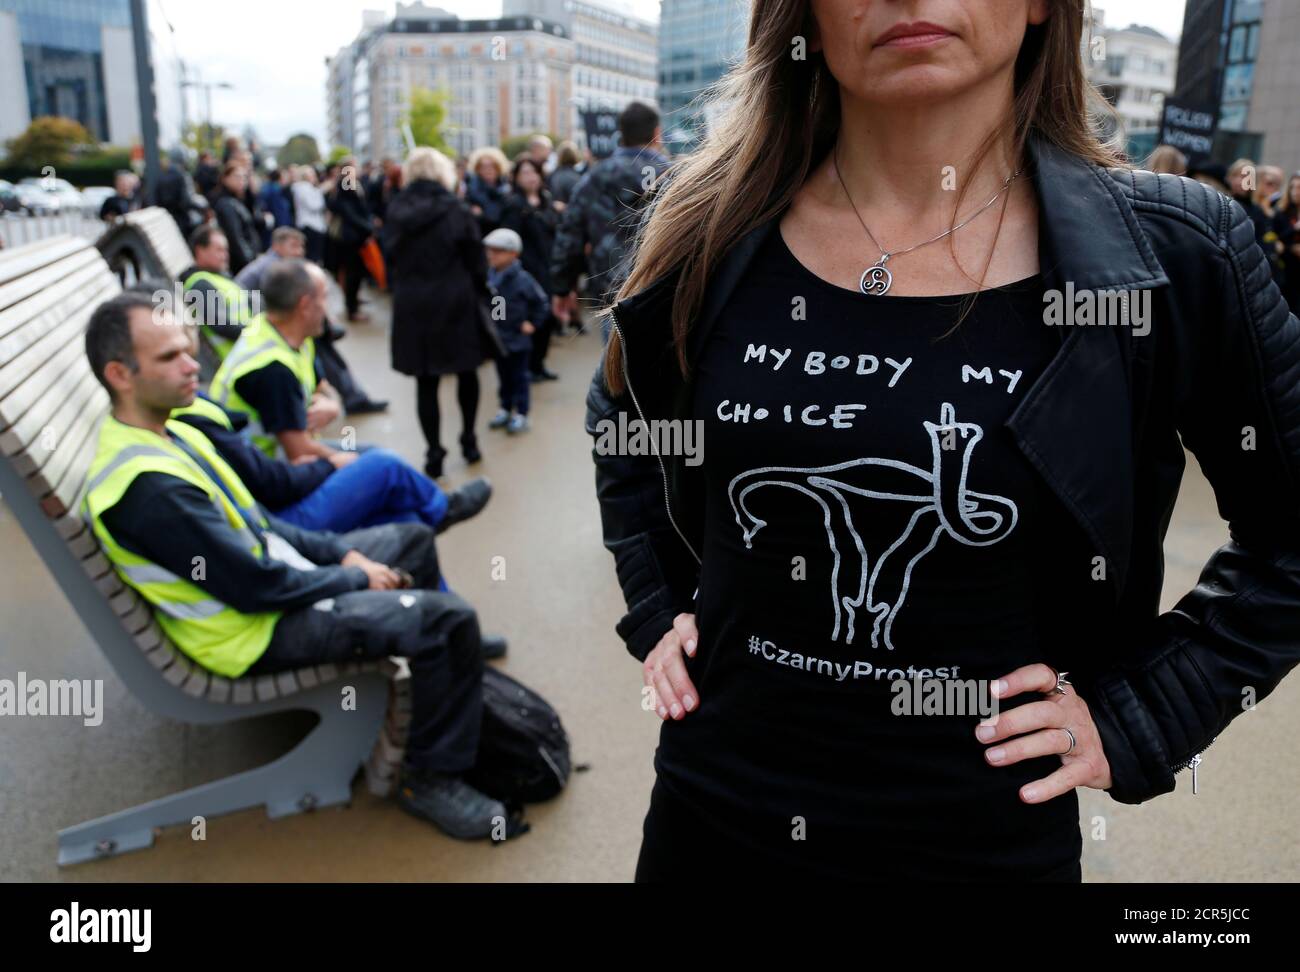 A demonstrator wears a shirt to protest against a proposed parliament bill to completely ban abortion in Poland, in front of European institutions in Brussels, Belgium, October 3, 2016. REUTERS/Francois Lenoir Stock Photo